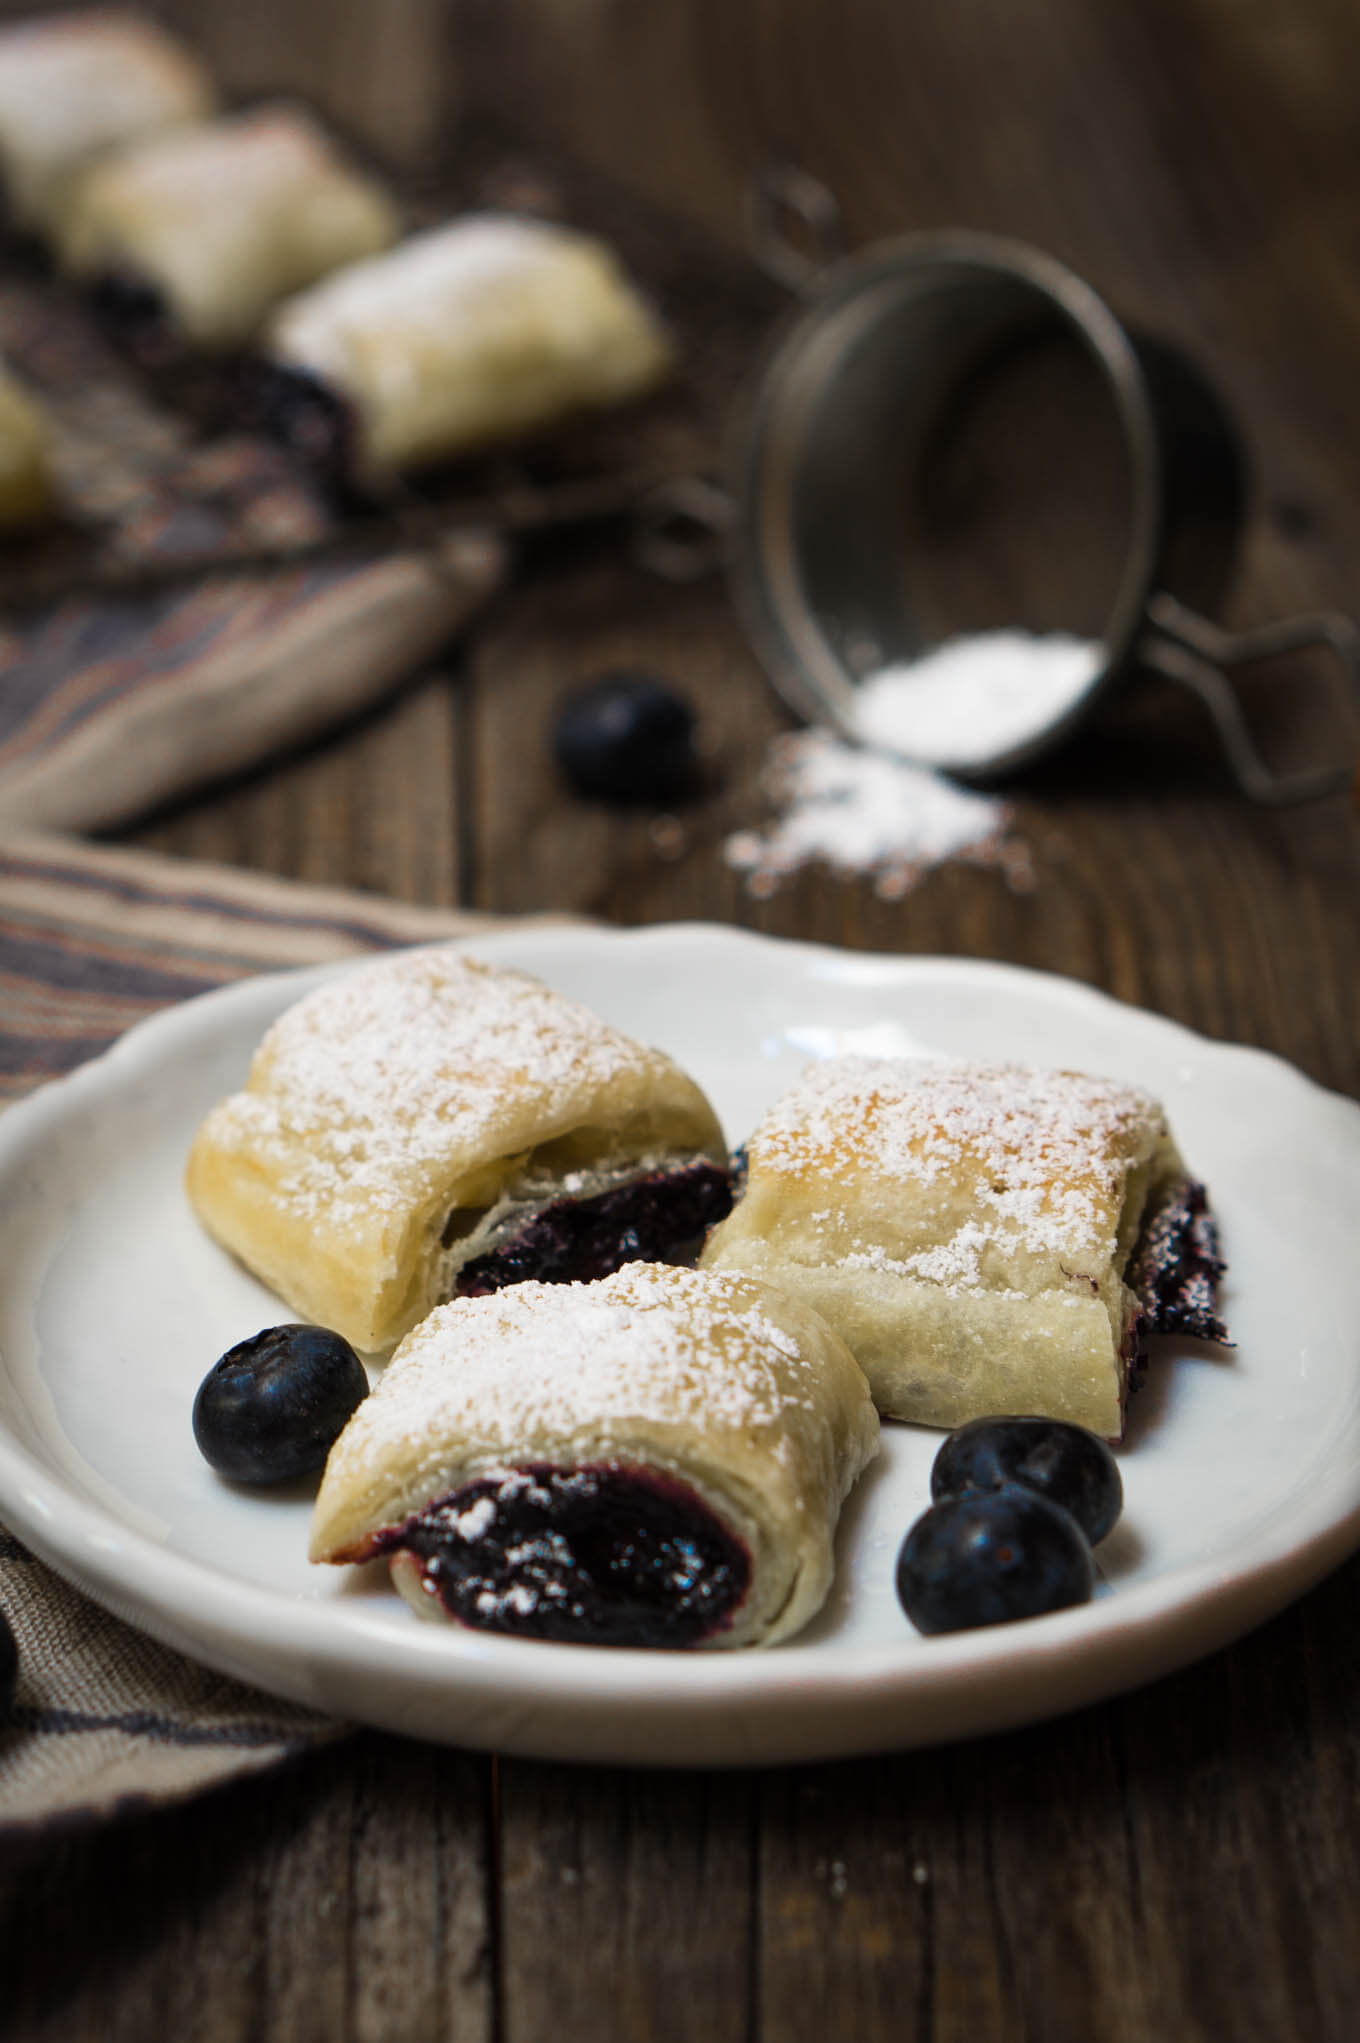 3 blueberry pastry rolls dusted in powdered sugar sitting on a white plate with 3 blueberries on top of a wooden board and in front of spilled powdered sugar.